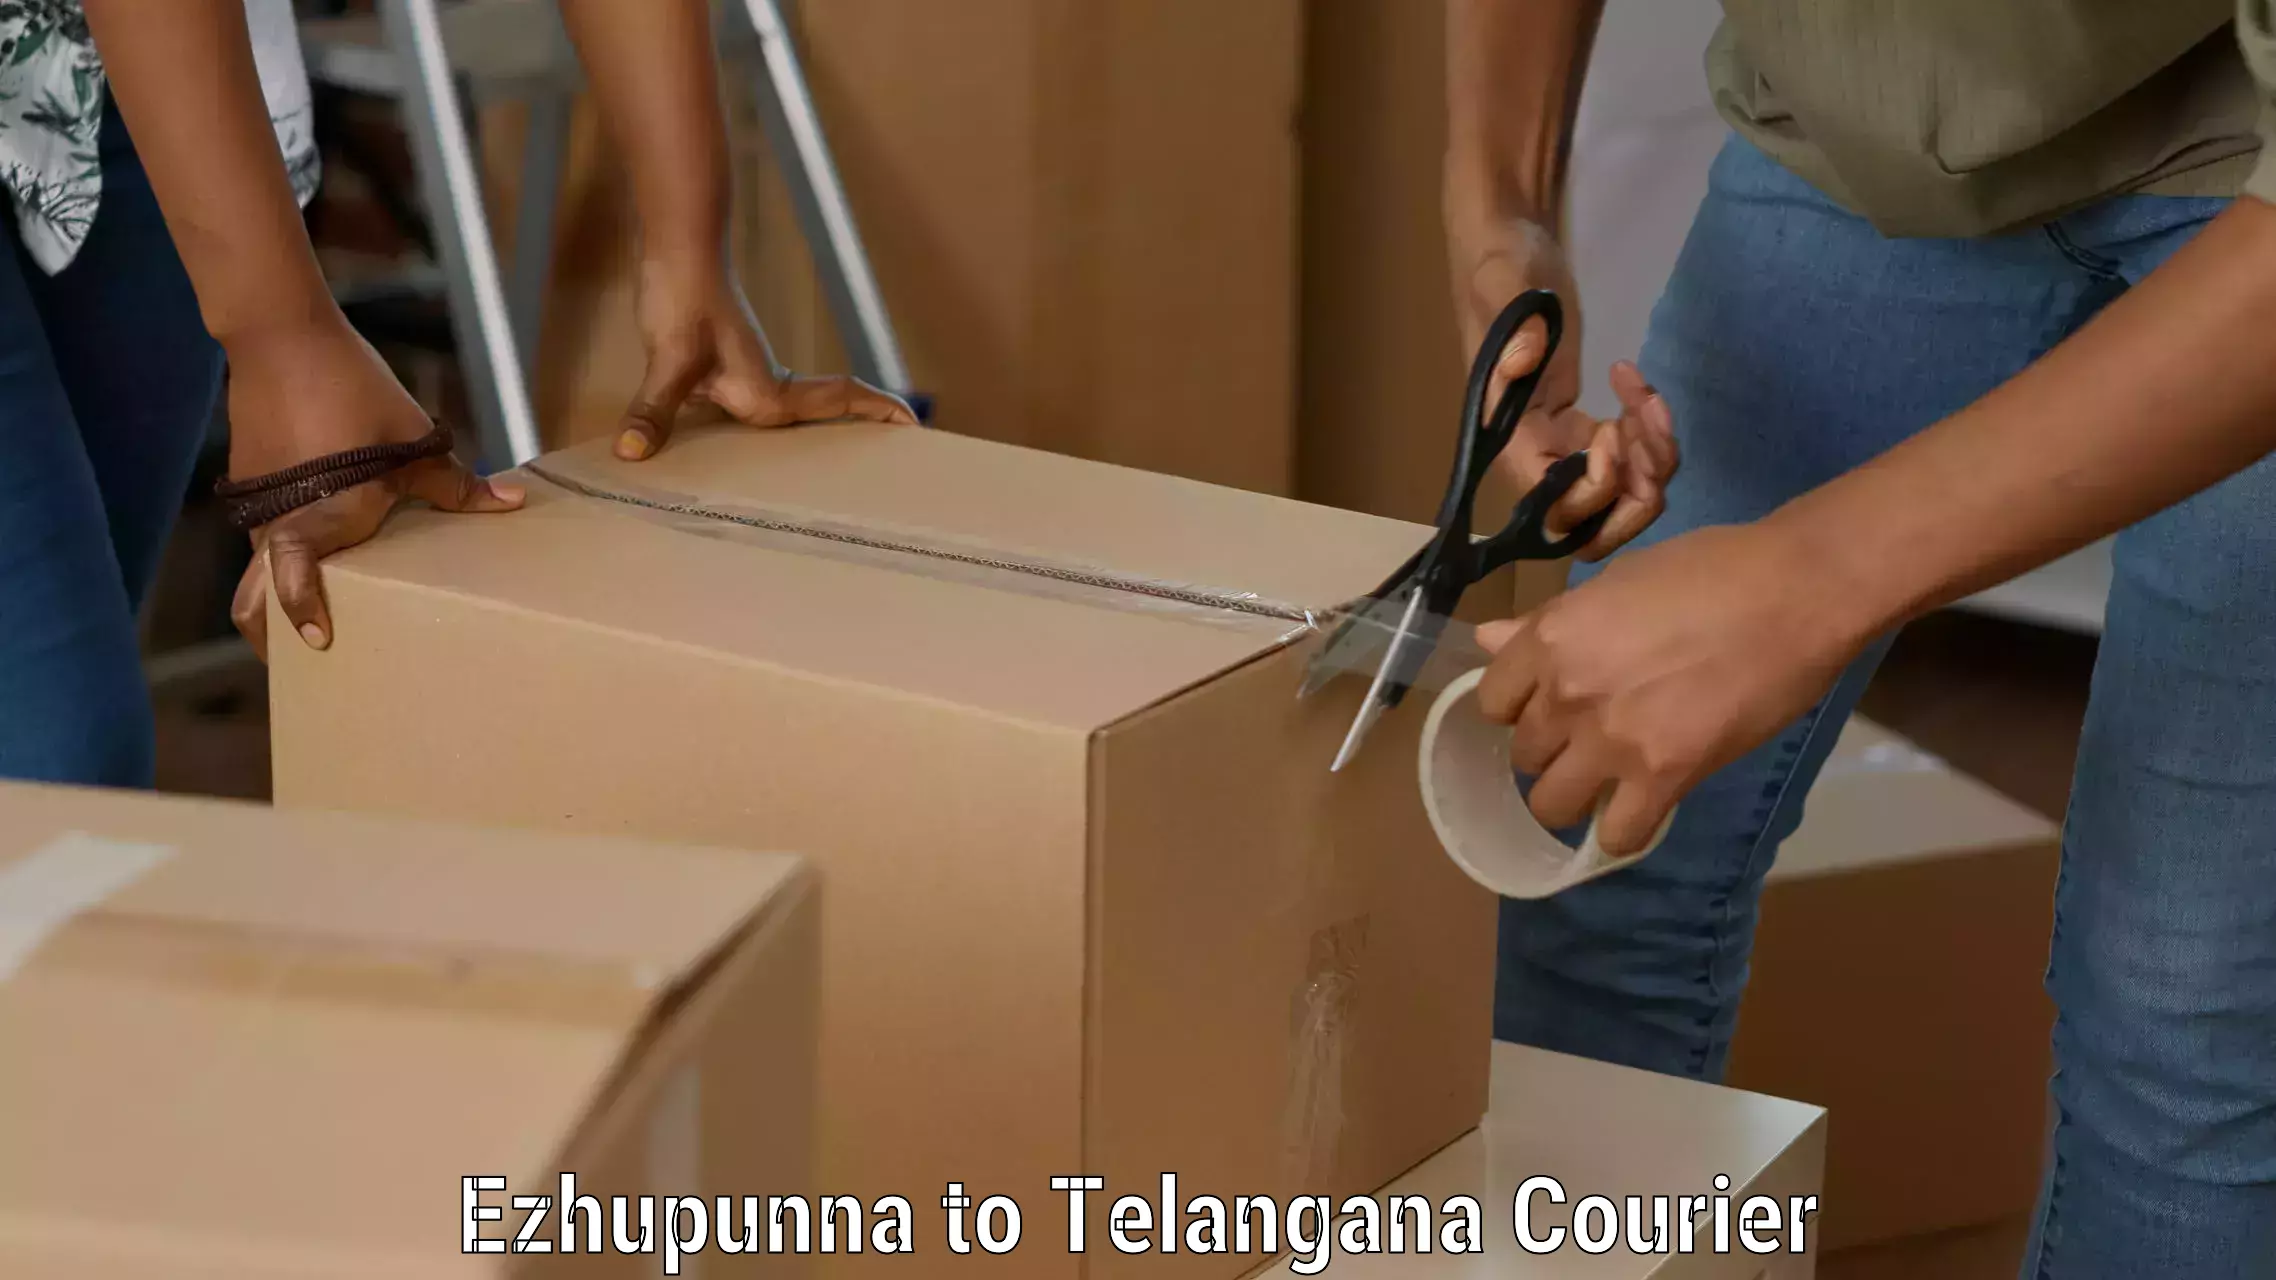 Same-day delivery solutions Ezhupunna to Netrang